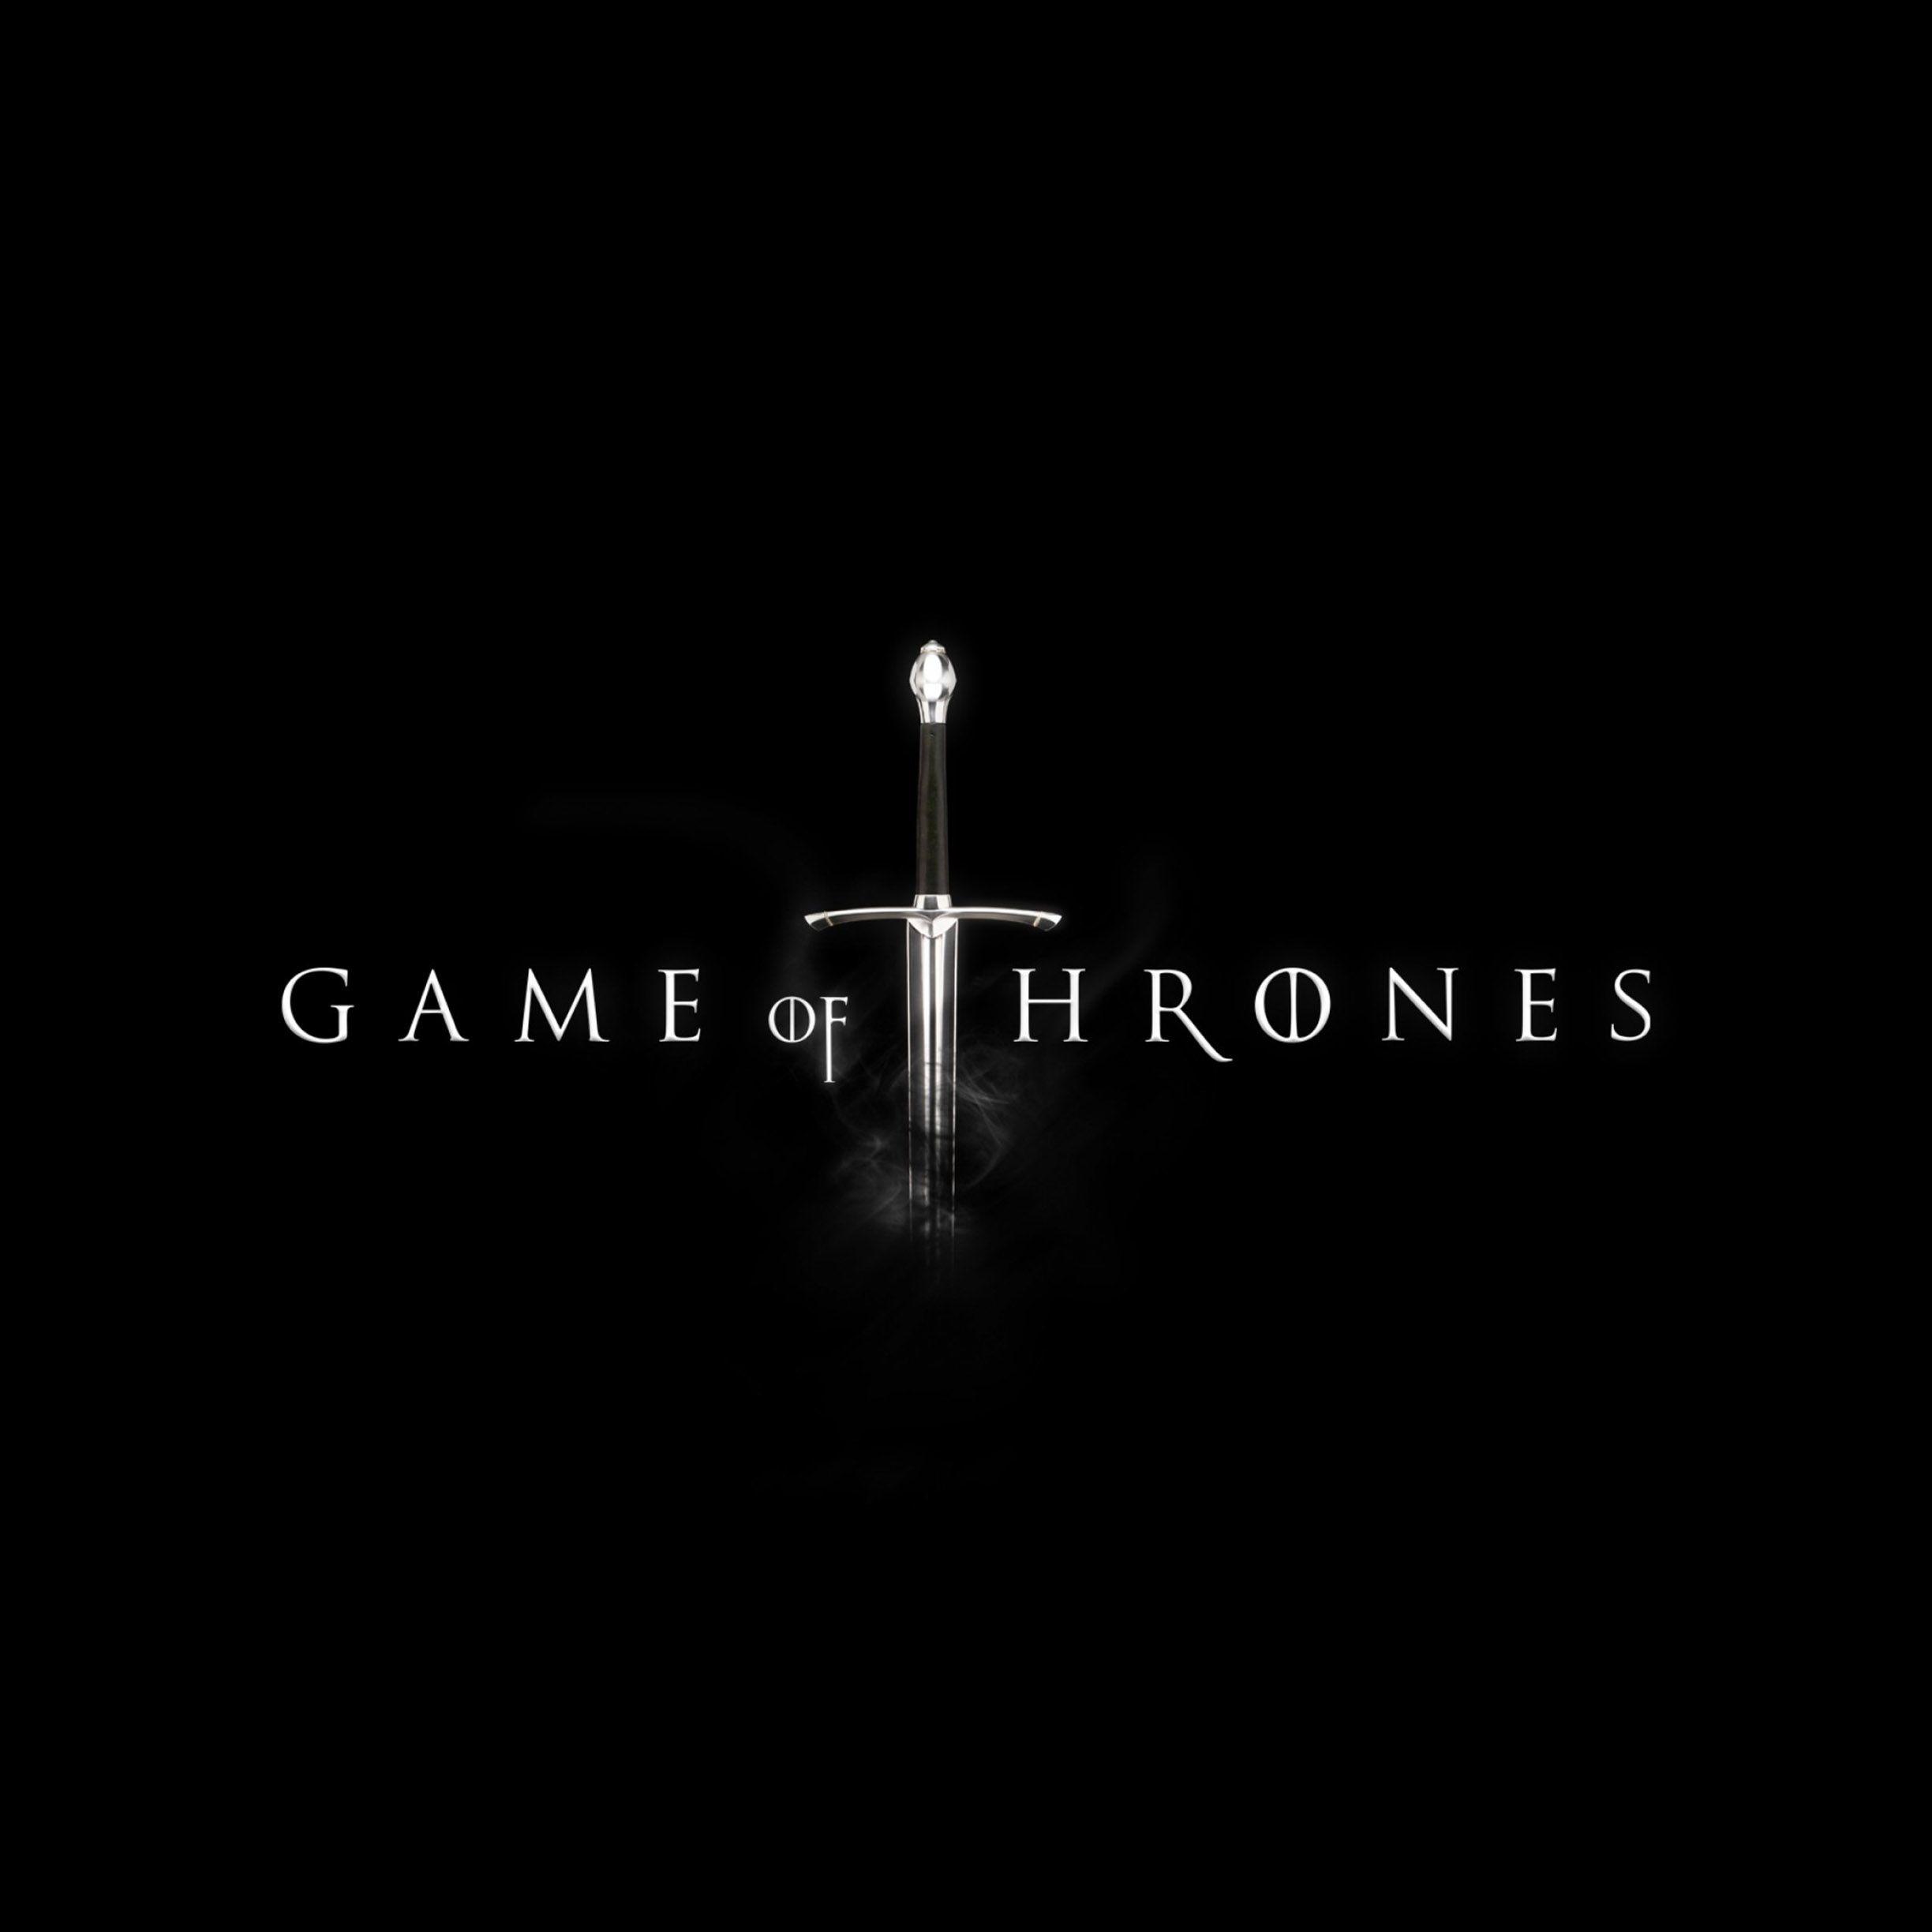 Game Of Thrones Ipad Wallpapers Top Free Game Of Thrones Ipad Backgrounds Wallpaperaccess